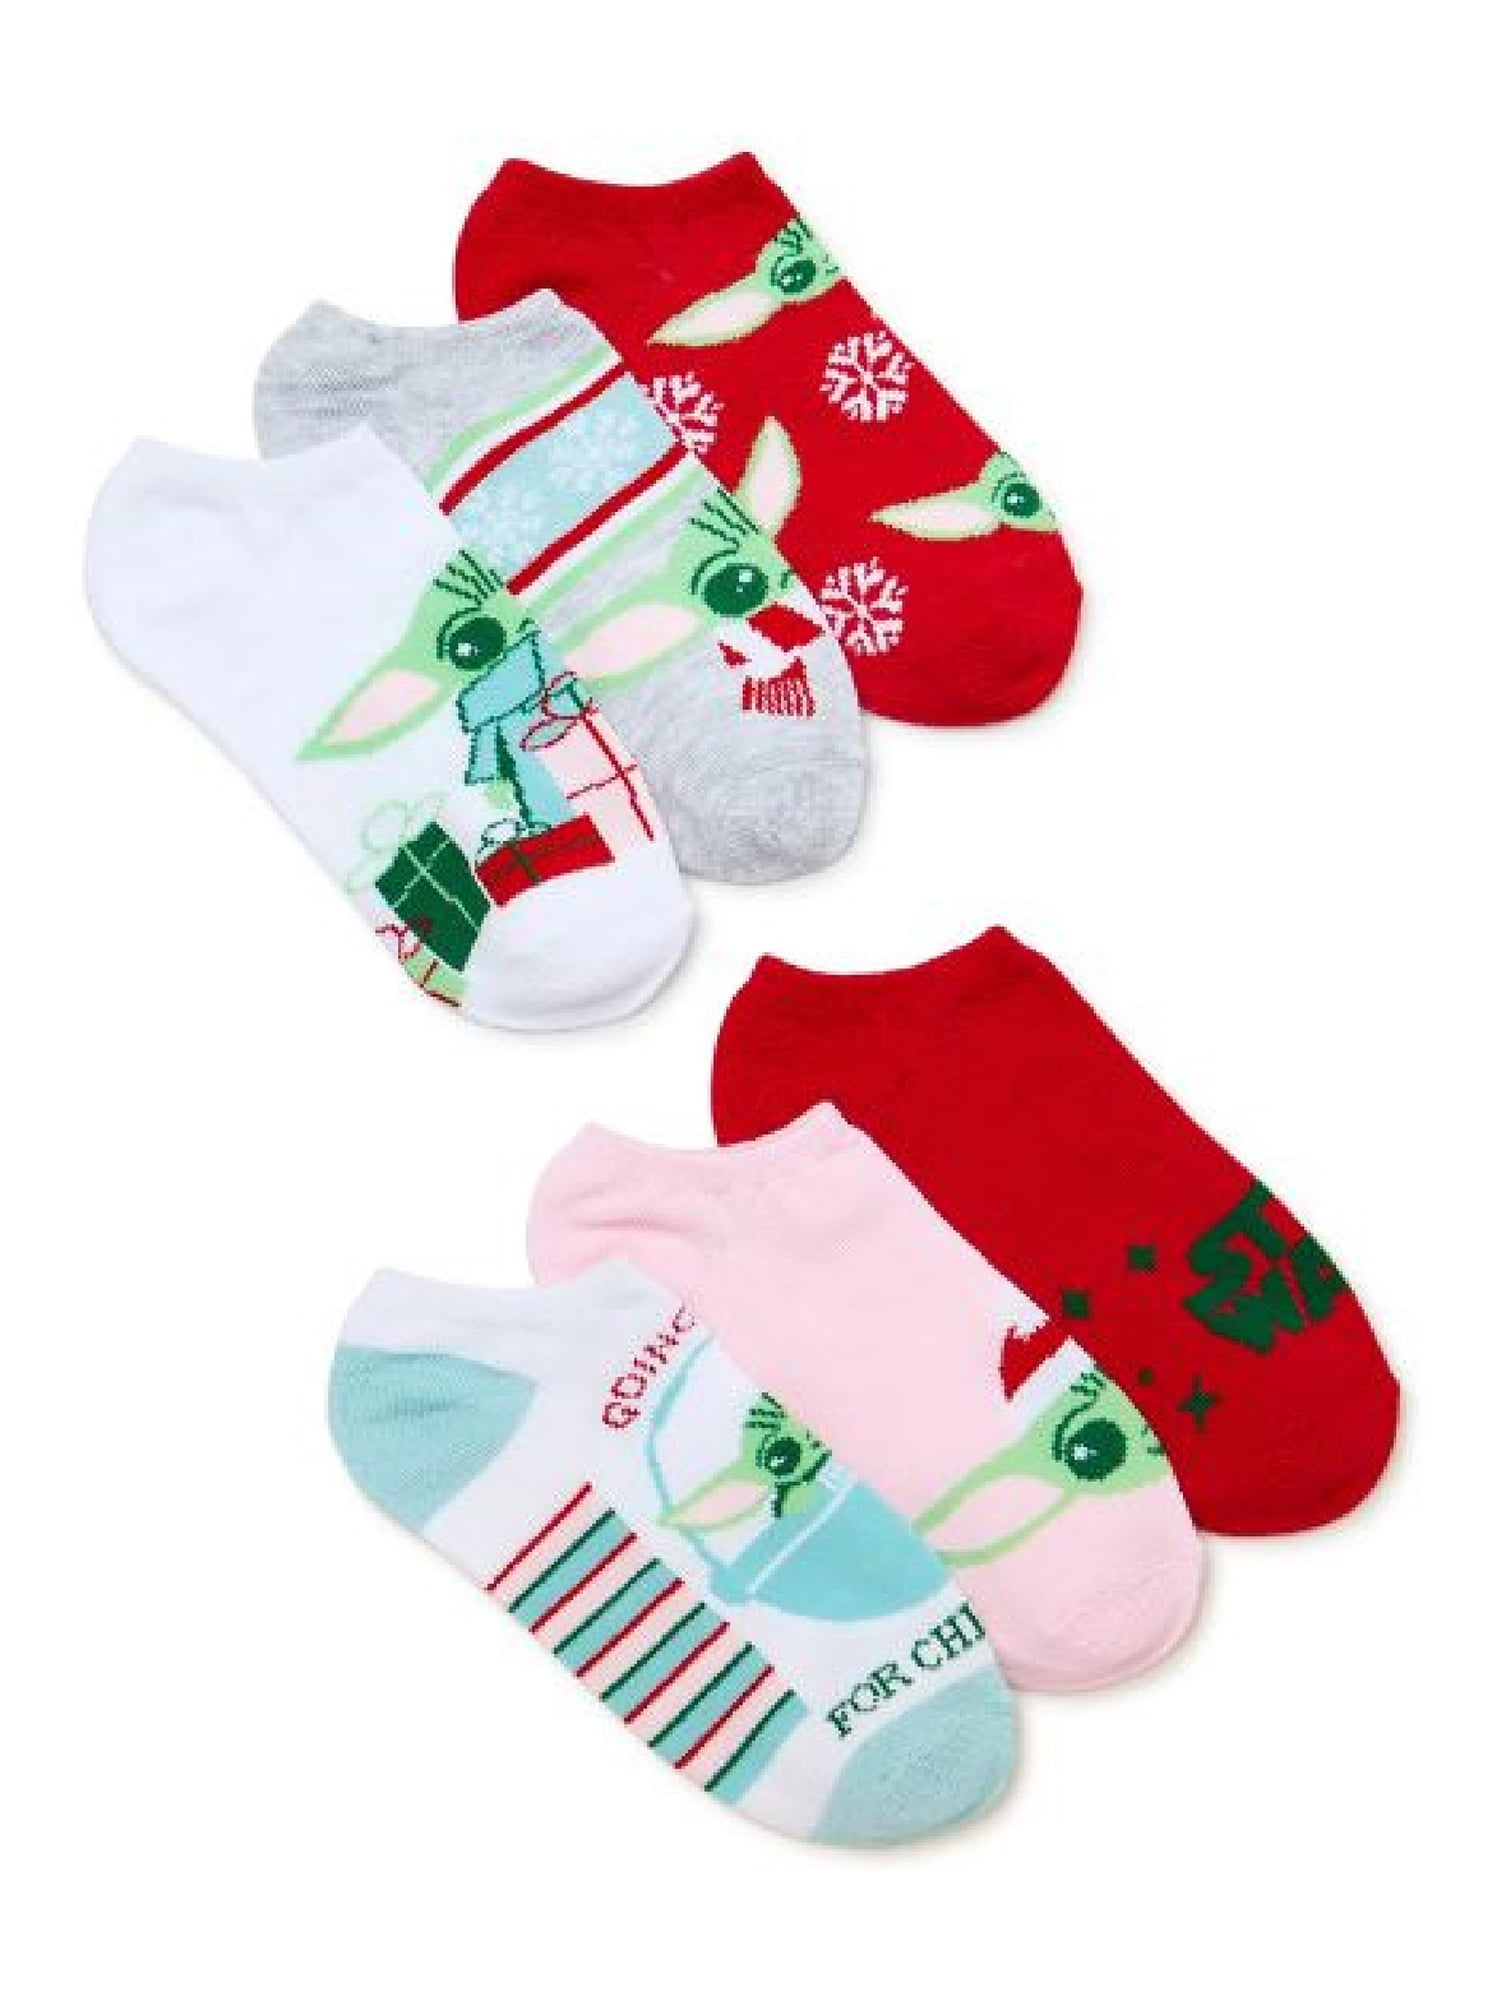 Star Wars The Mandalorian, Holiday Women's No-Show Socks, 6-Pack, Size 4-10